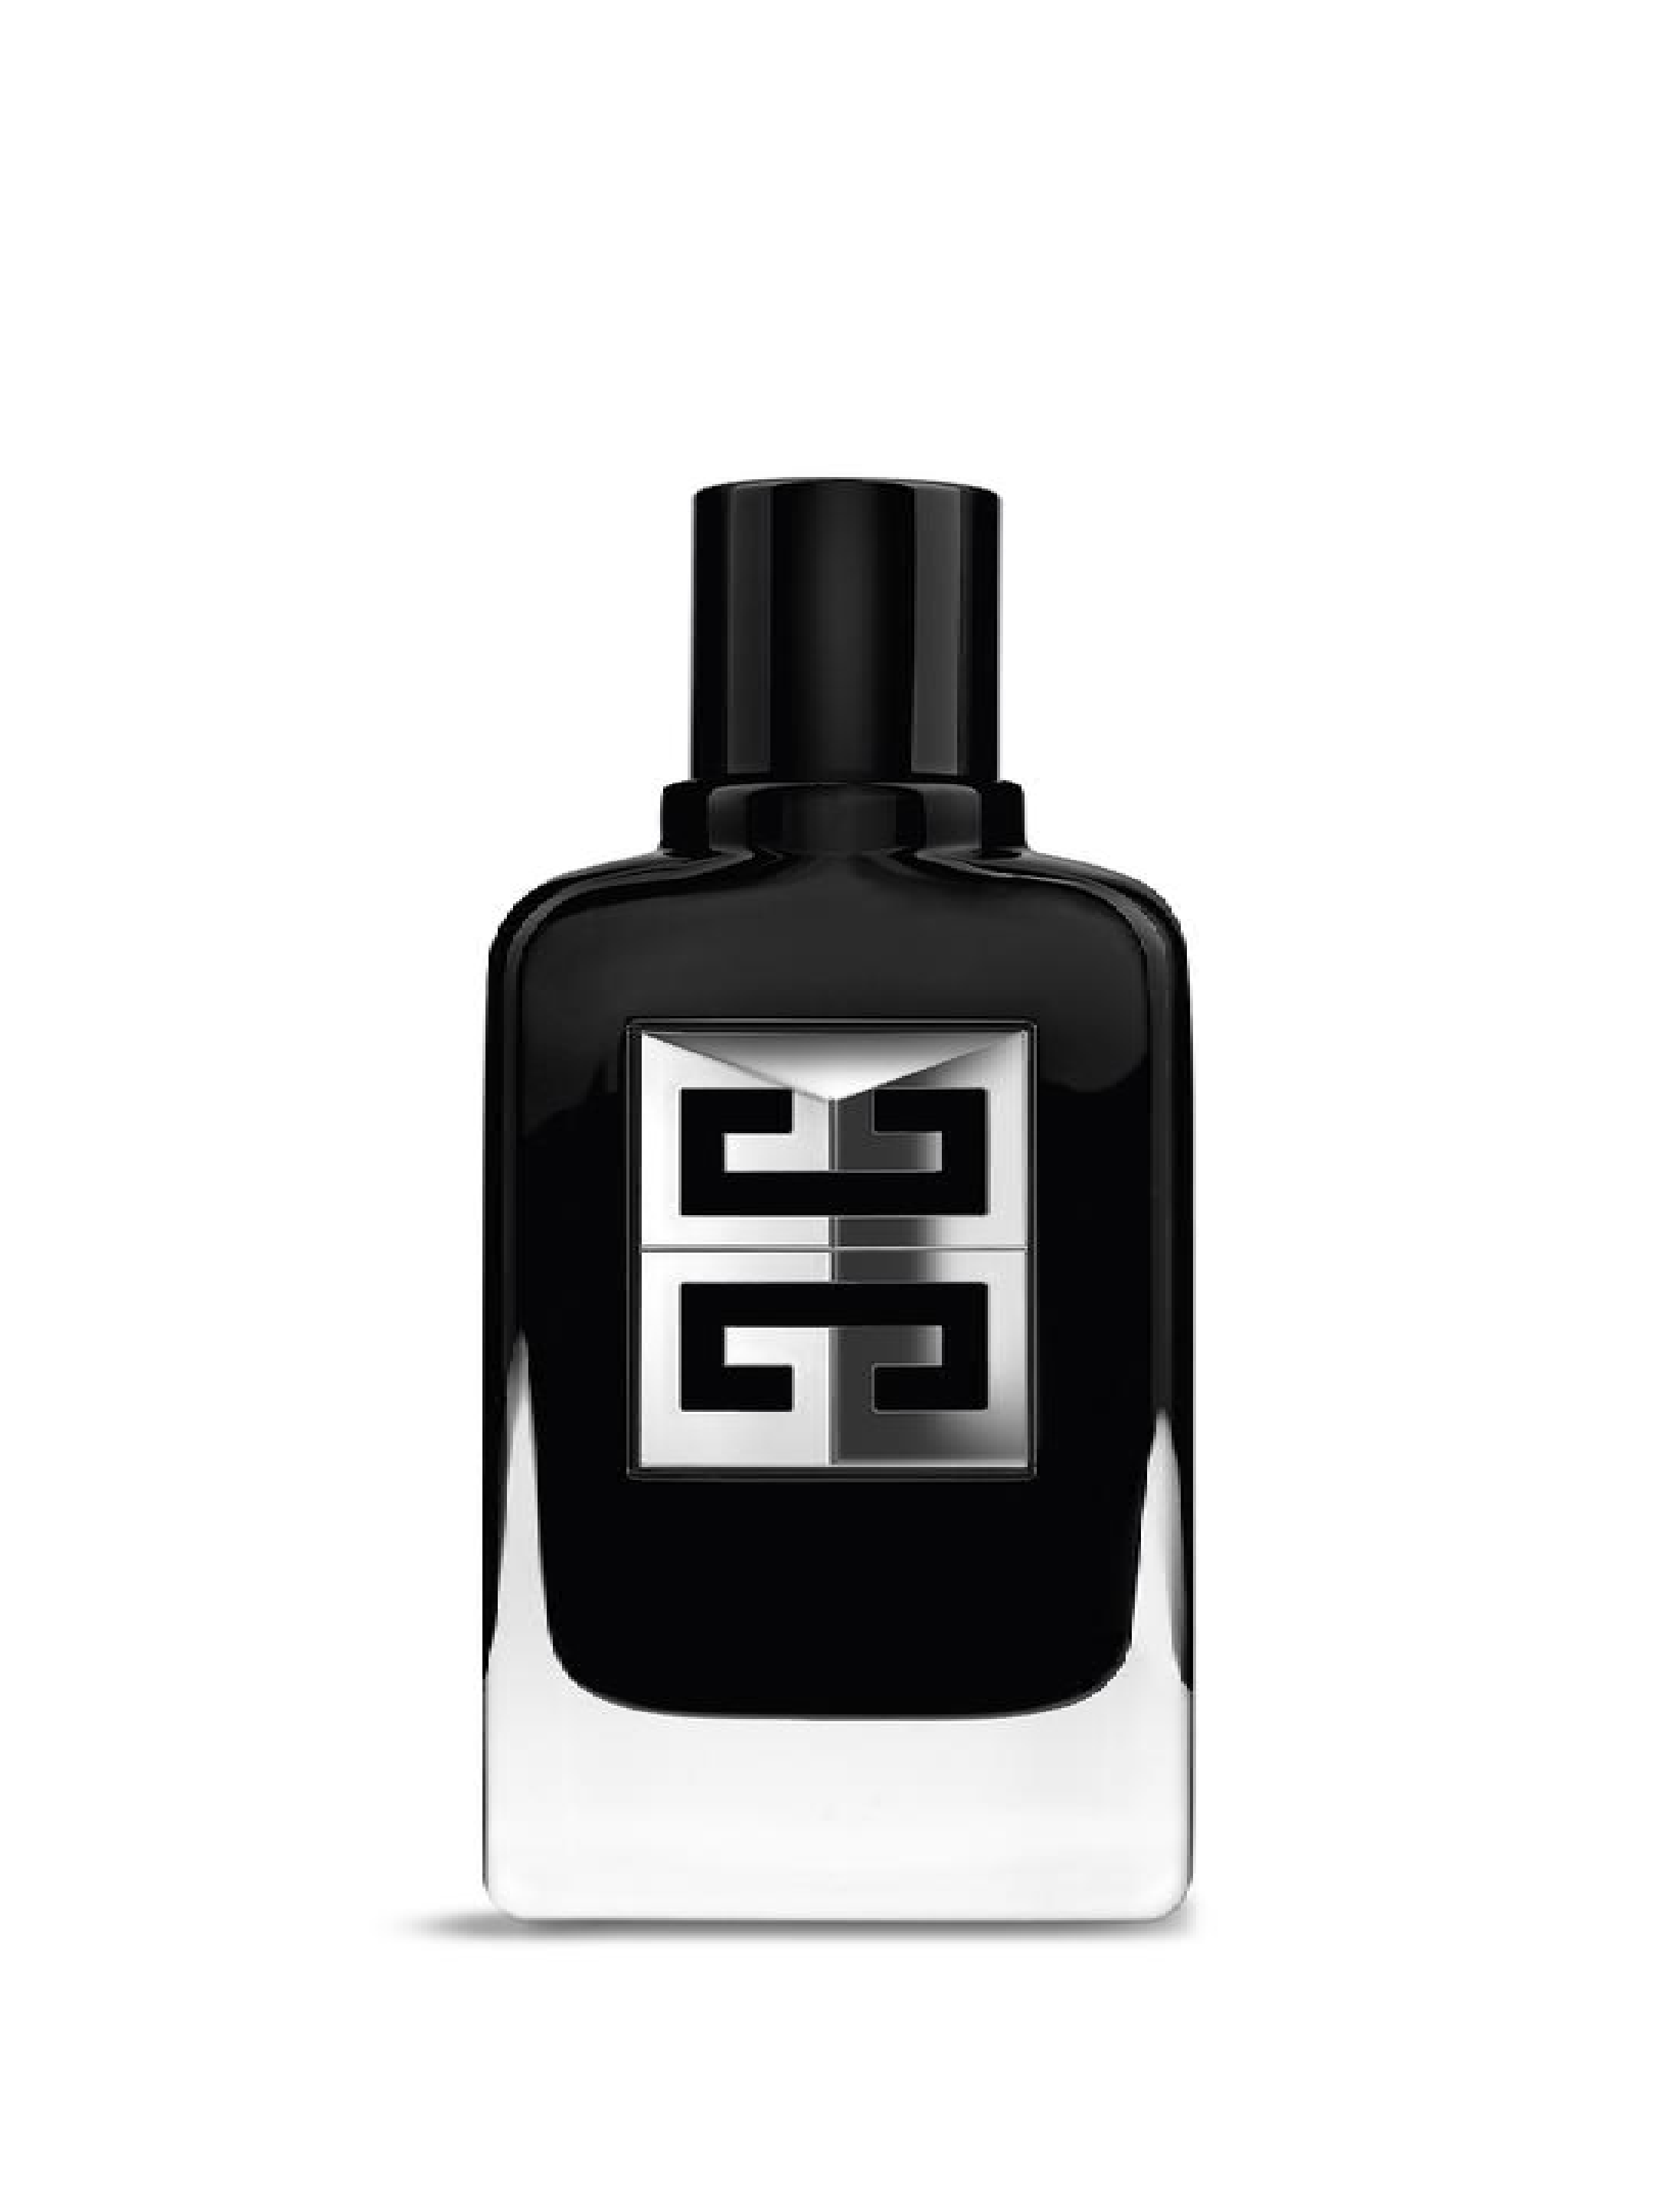 Givenchy society. Givenchy Gentleman Society Eau de Parfum. Givenchy Gentlemen Society 100 ml. Givenchy Gentleman 100ml EDP. Givenchy Gentleman Society Eau de Parfum парфюмерная вода 100 мл.